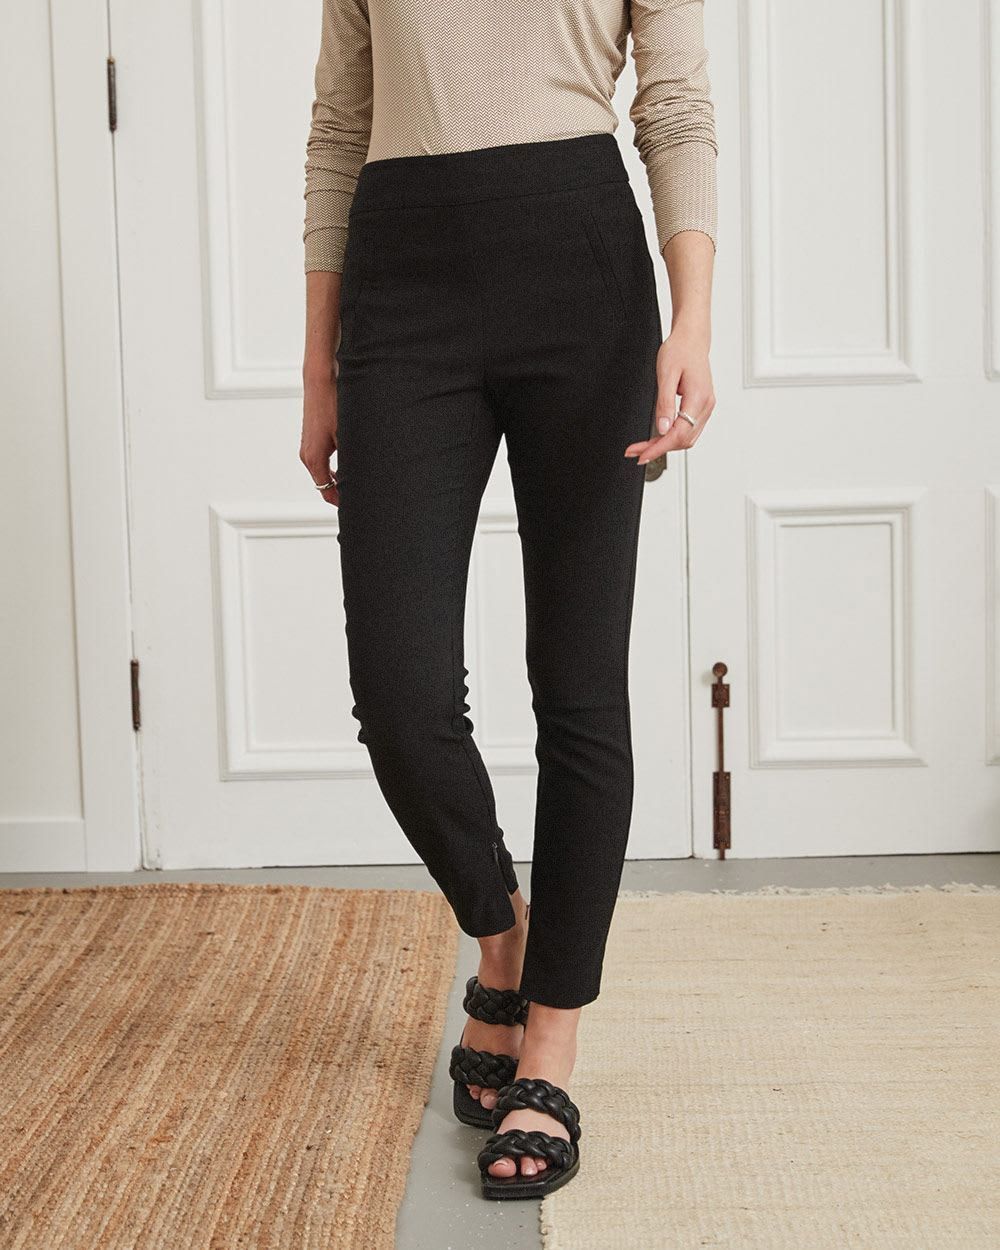 High-Waisted Twill Legging Pant - 28"